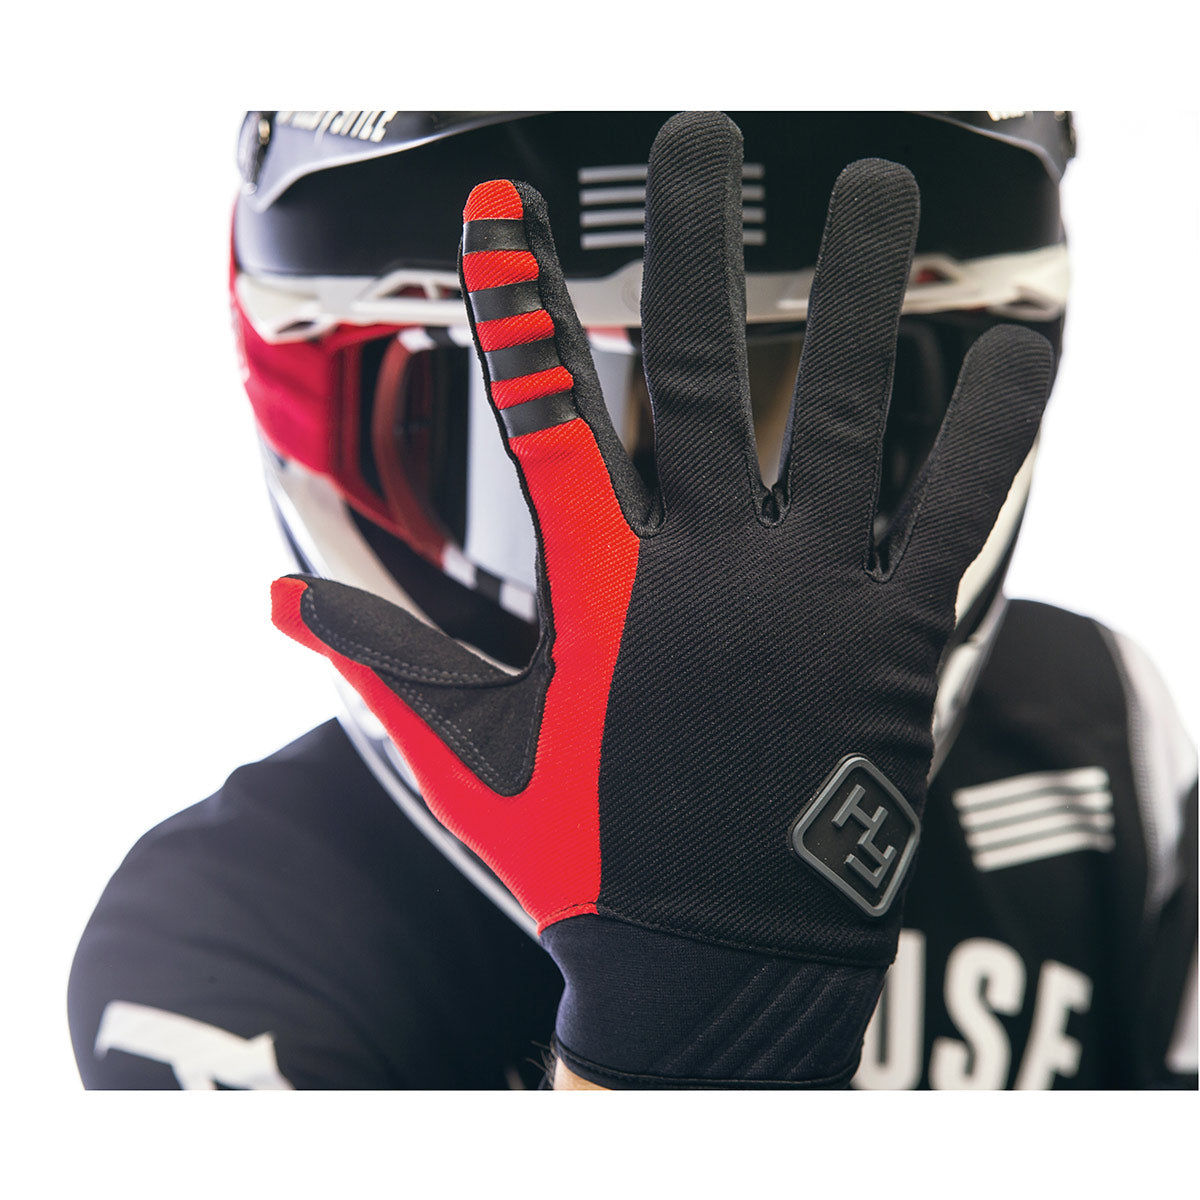 Fasthouse - Grindhouse 2.0 Glove - Red